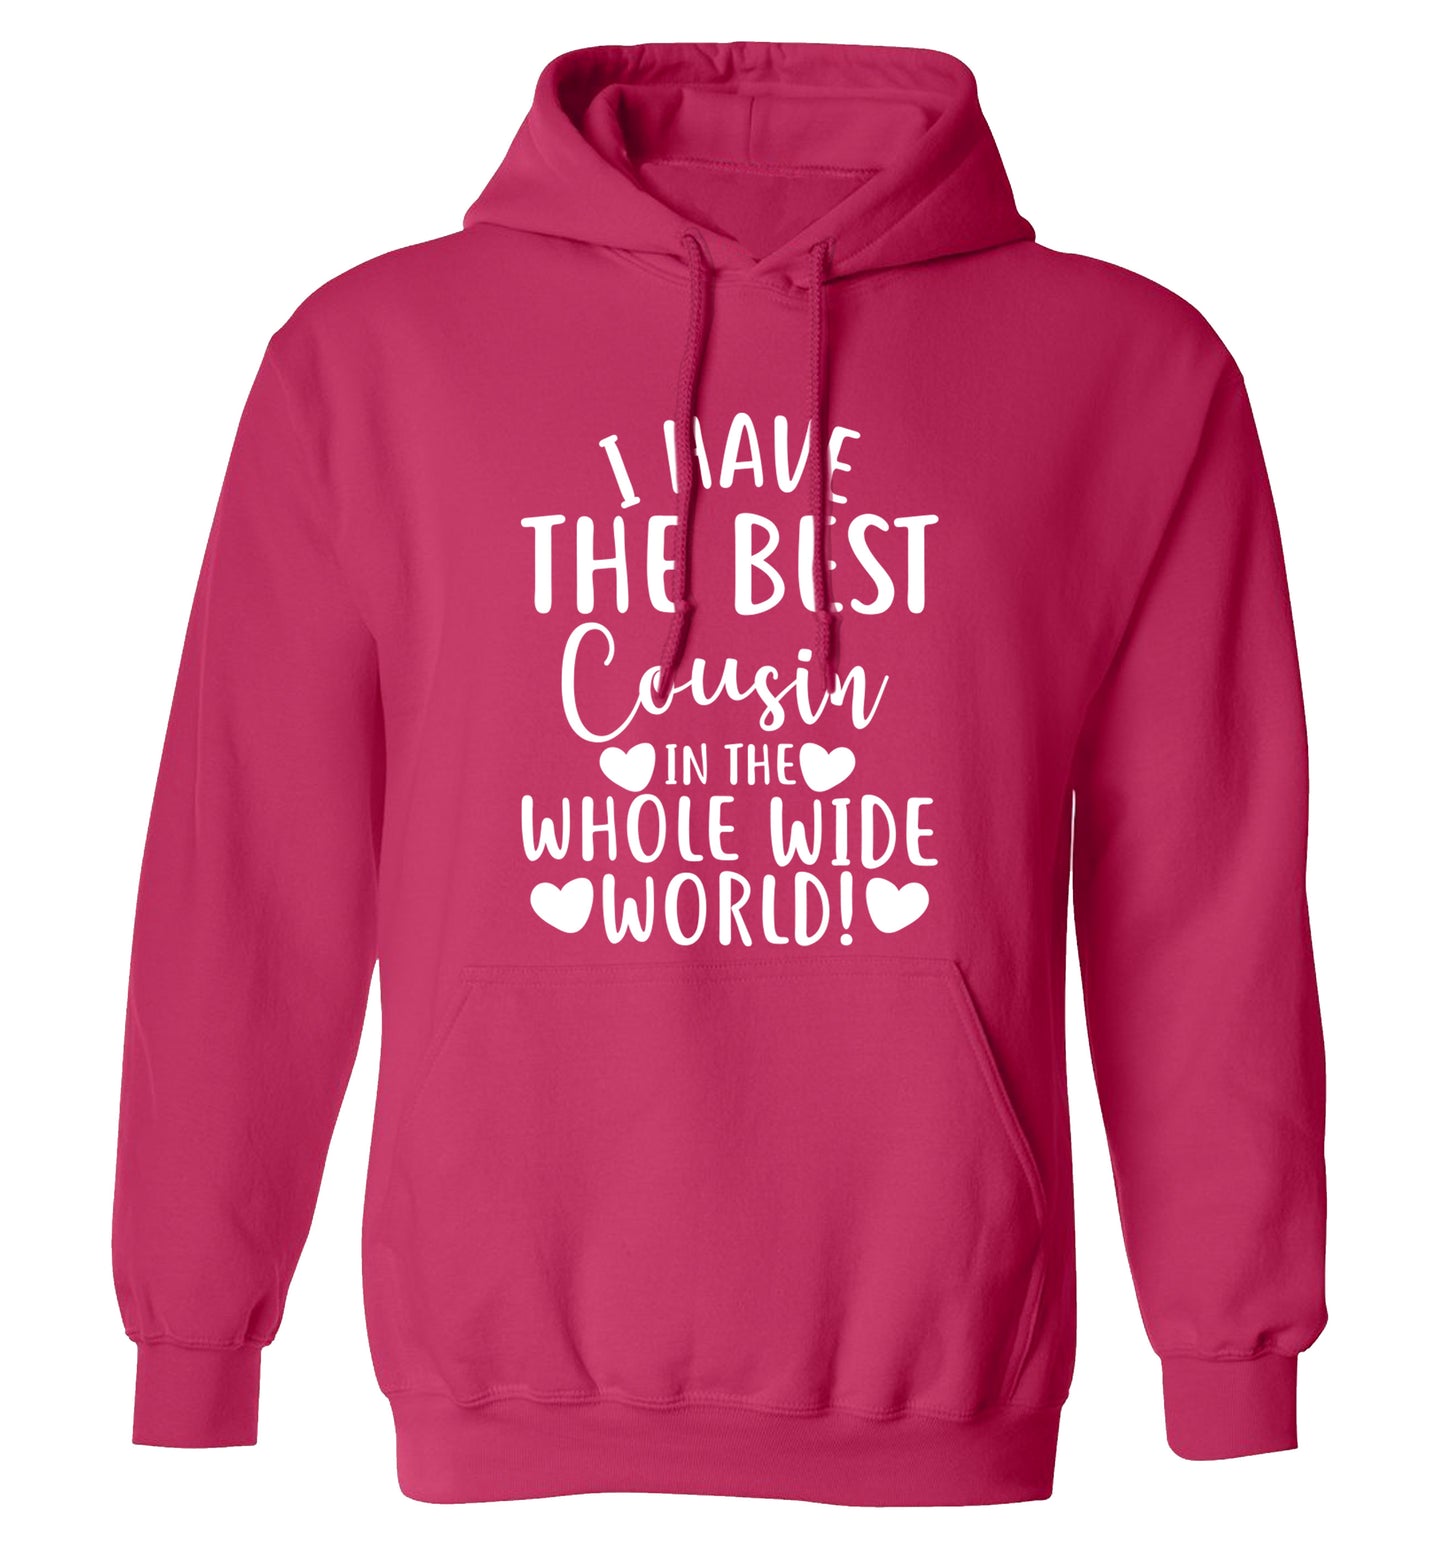 I have the best cousin in the whole wide world! adults unisex pink hoodie 2XL